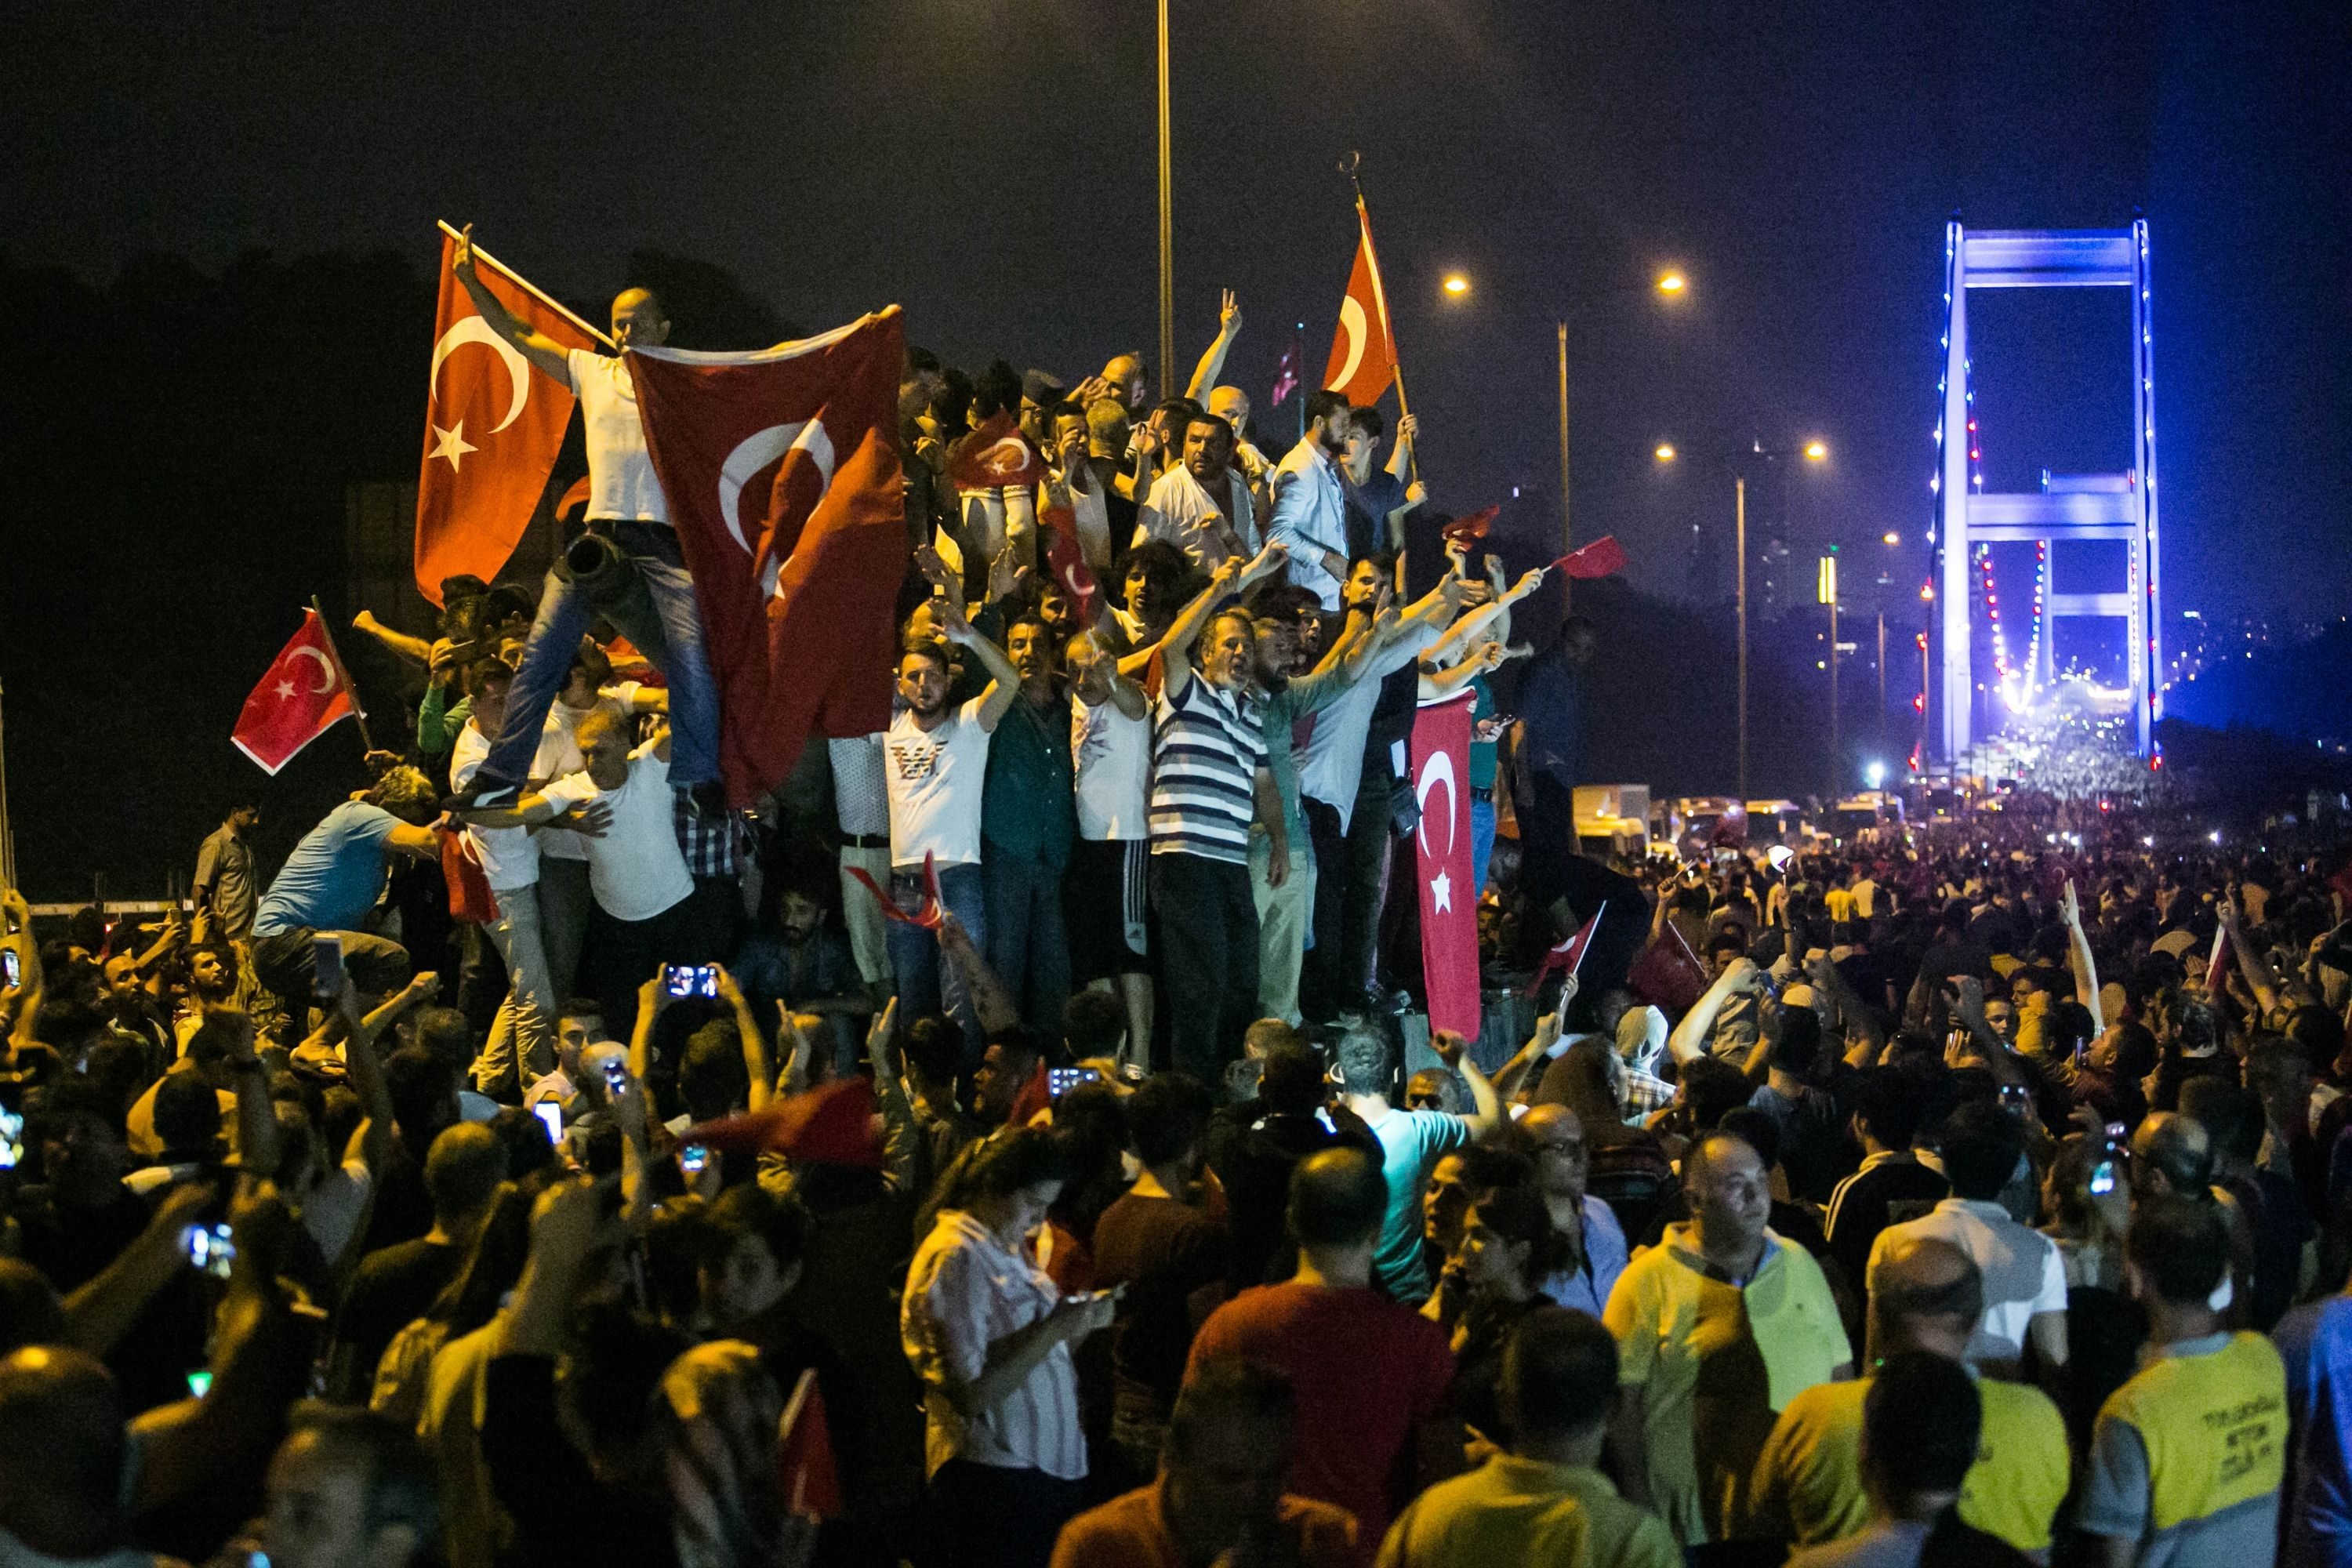 People take to the streets near the Fatih Sultan Mehmet bridge during the resistance against the coup plotters, Istanbul, Turkey, July 16, 2016. (AFP Photo)